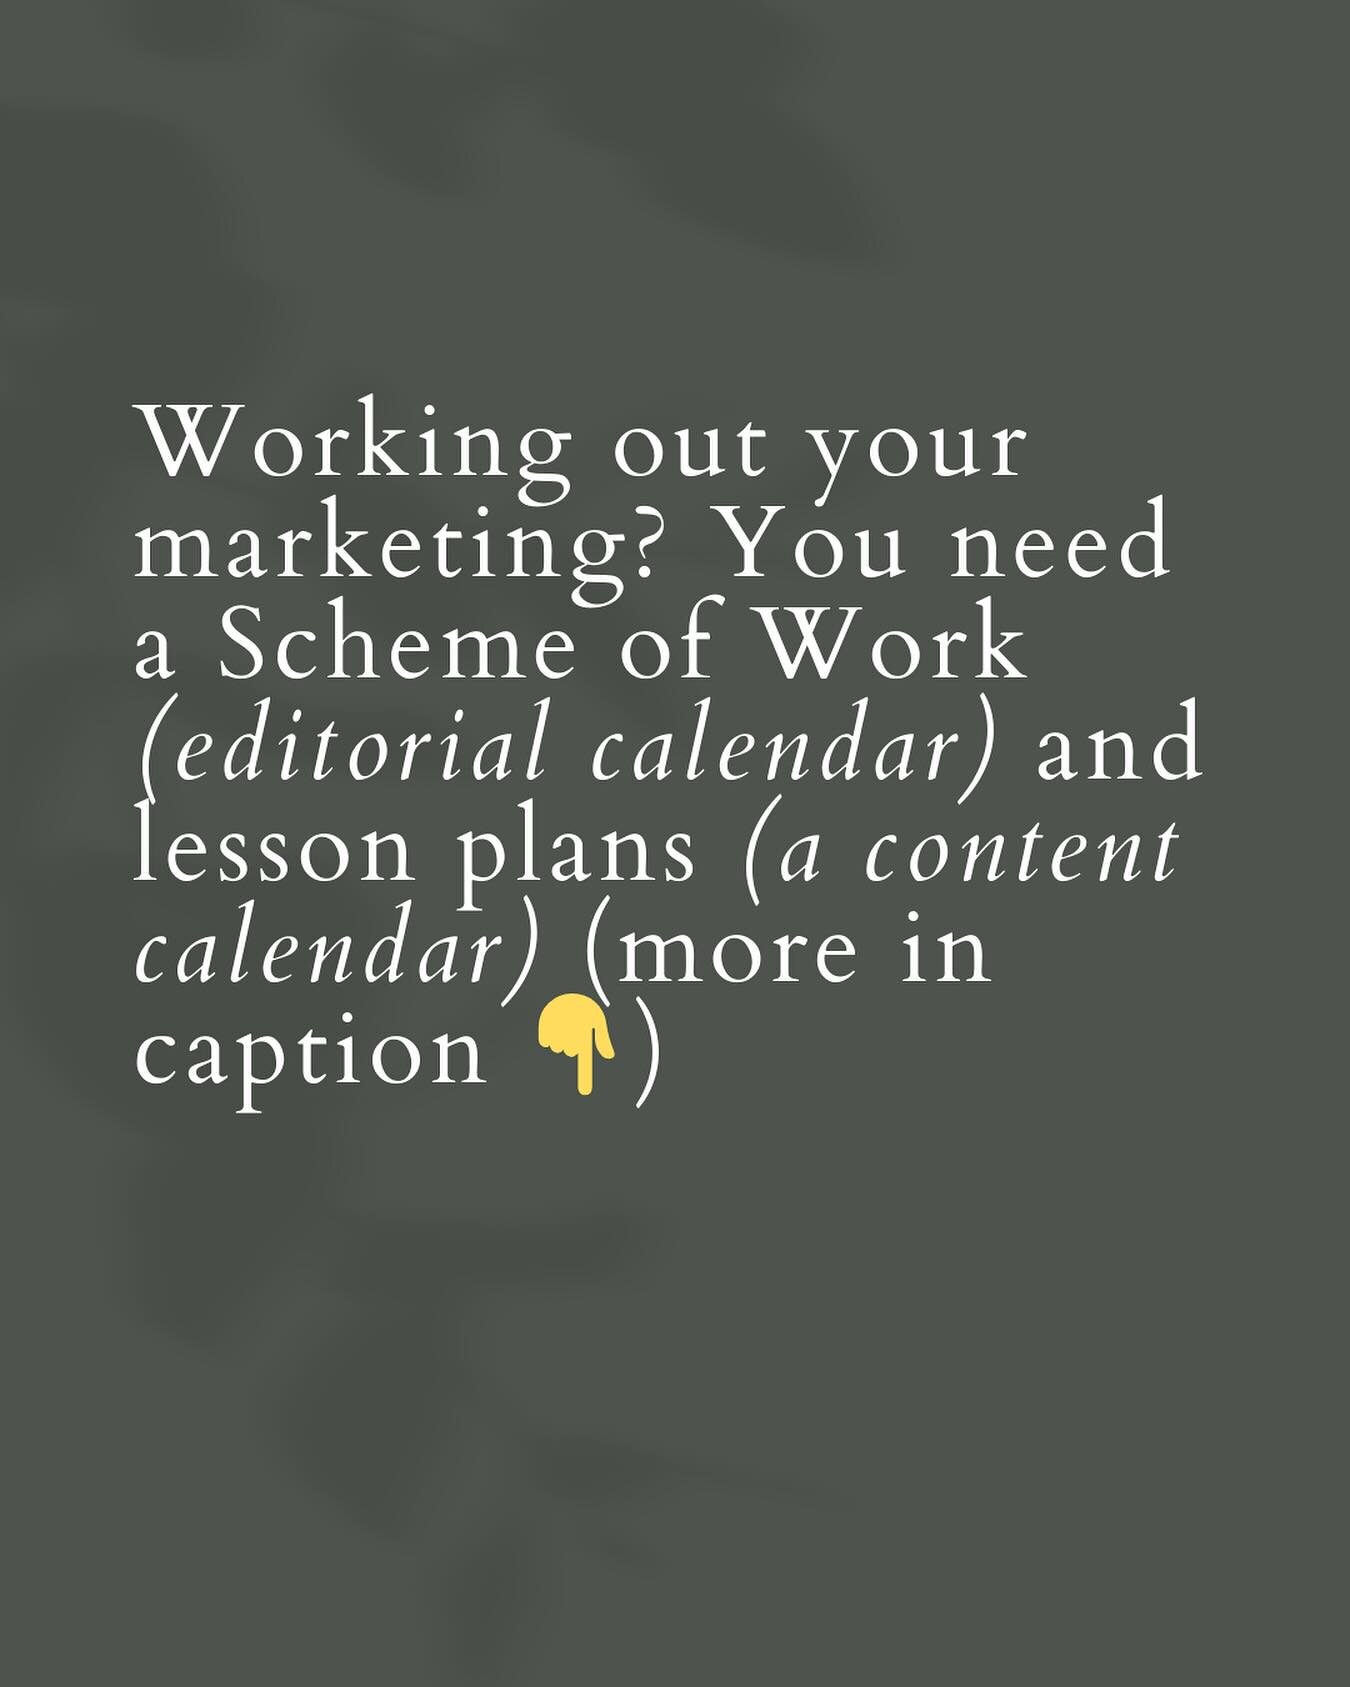 Say what now?
The Scheme of Work is your overarching planning, where you create long-term planning in order to establish the outcomes you want your students (and you as the teacher or guide) to achieve, the strategy and approaches you&rsquo;ll adopt 